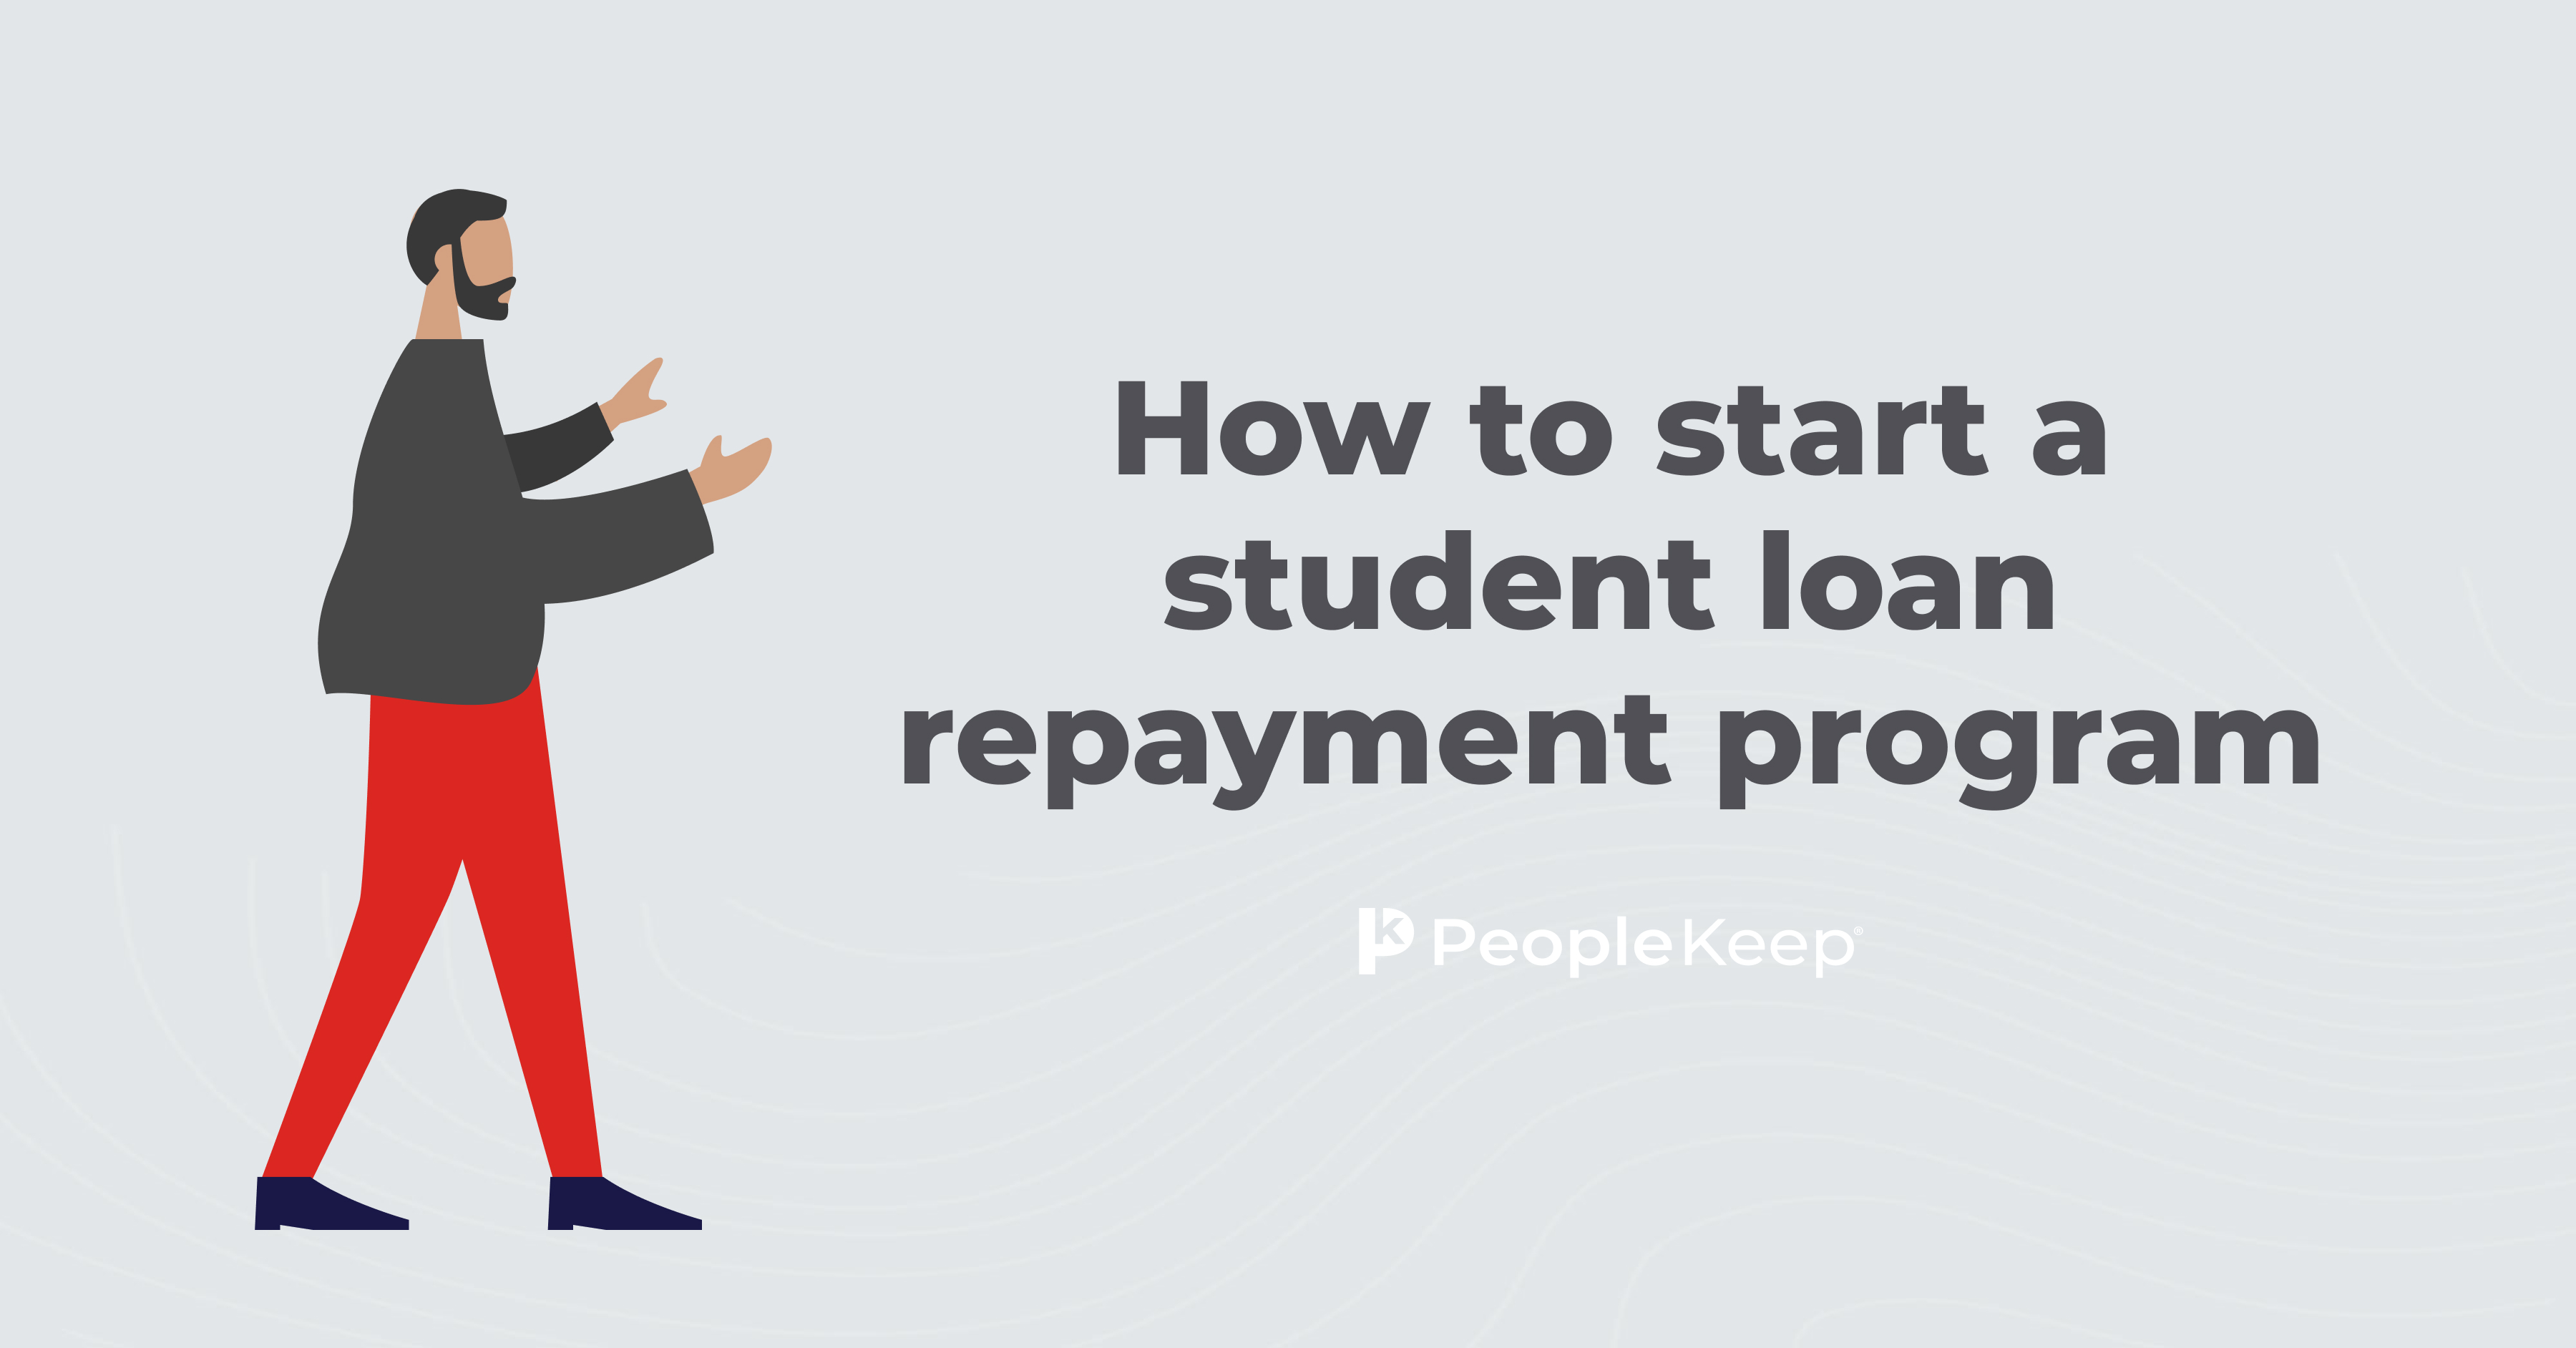 How to start a student loan repayment program